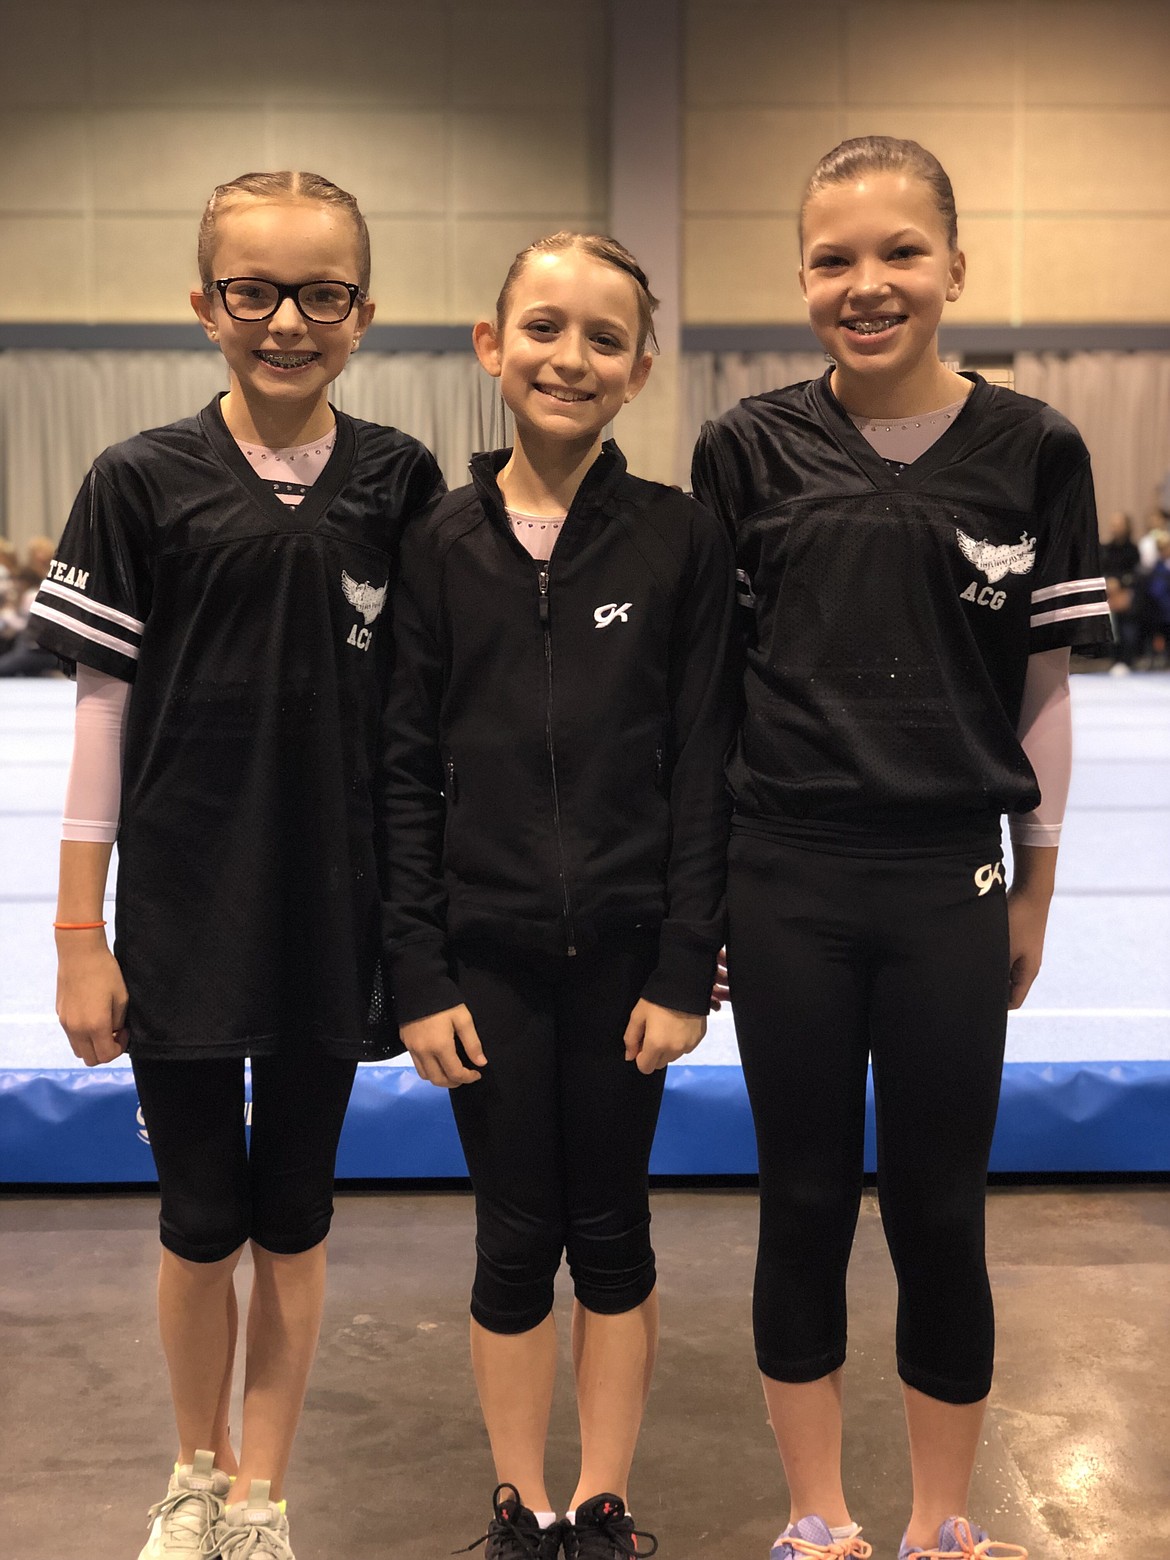 Courtesy photo
Avant Coeur Gymnastics Level 6s and 4s competed at the National Judges Cup in Overland Park, Kan. From left are Eden Lamburth, Kayce George and Aliyah Williams.